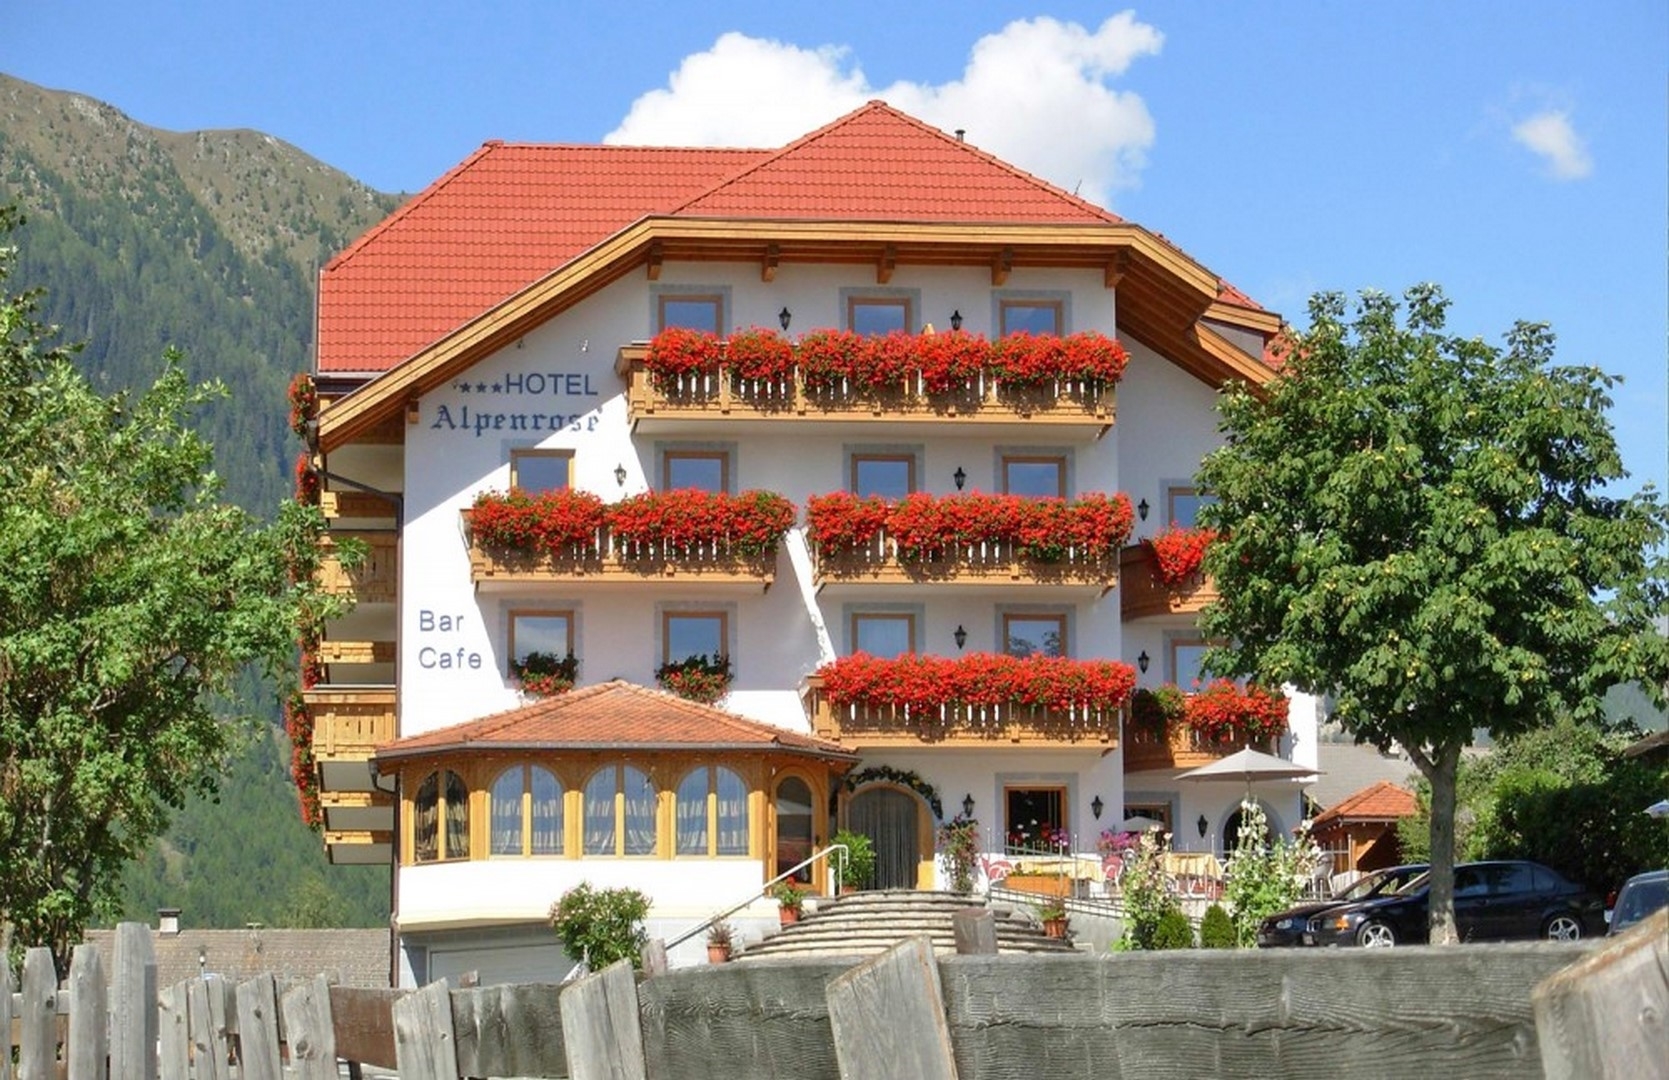 Alpenrose B&B Hotel Suite & Apartments - Vals in Eisacktal